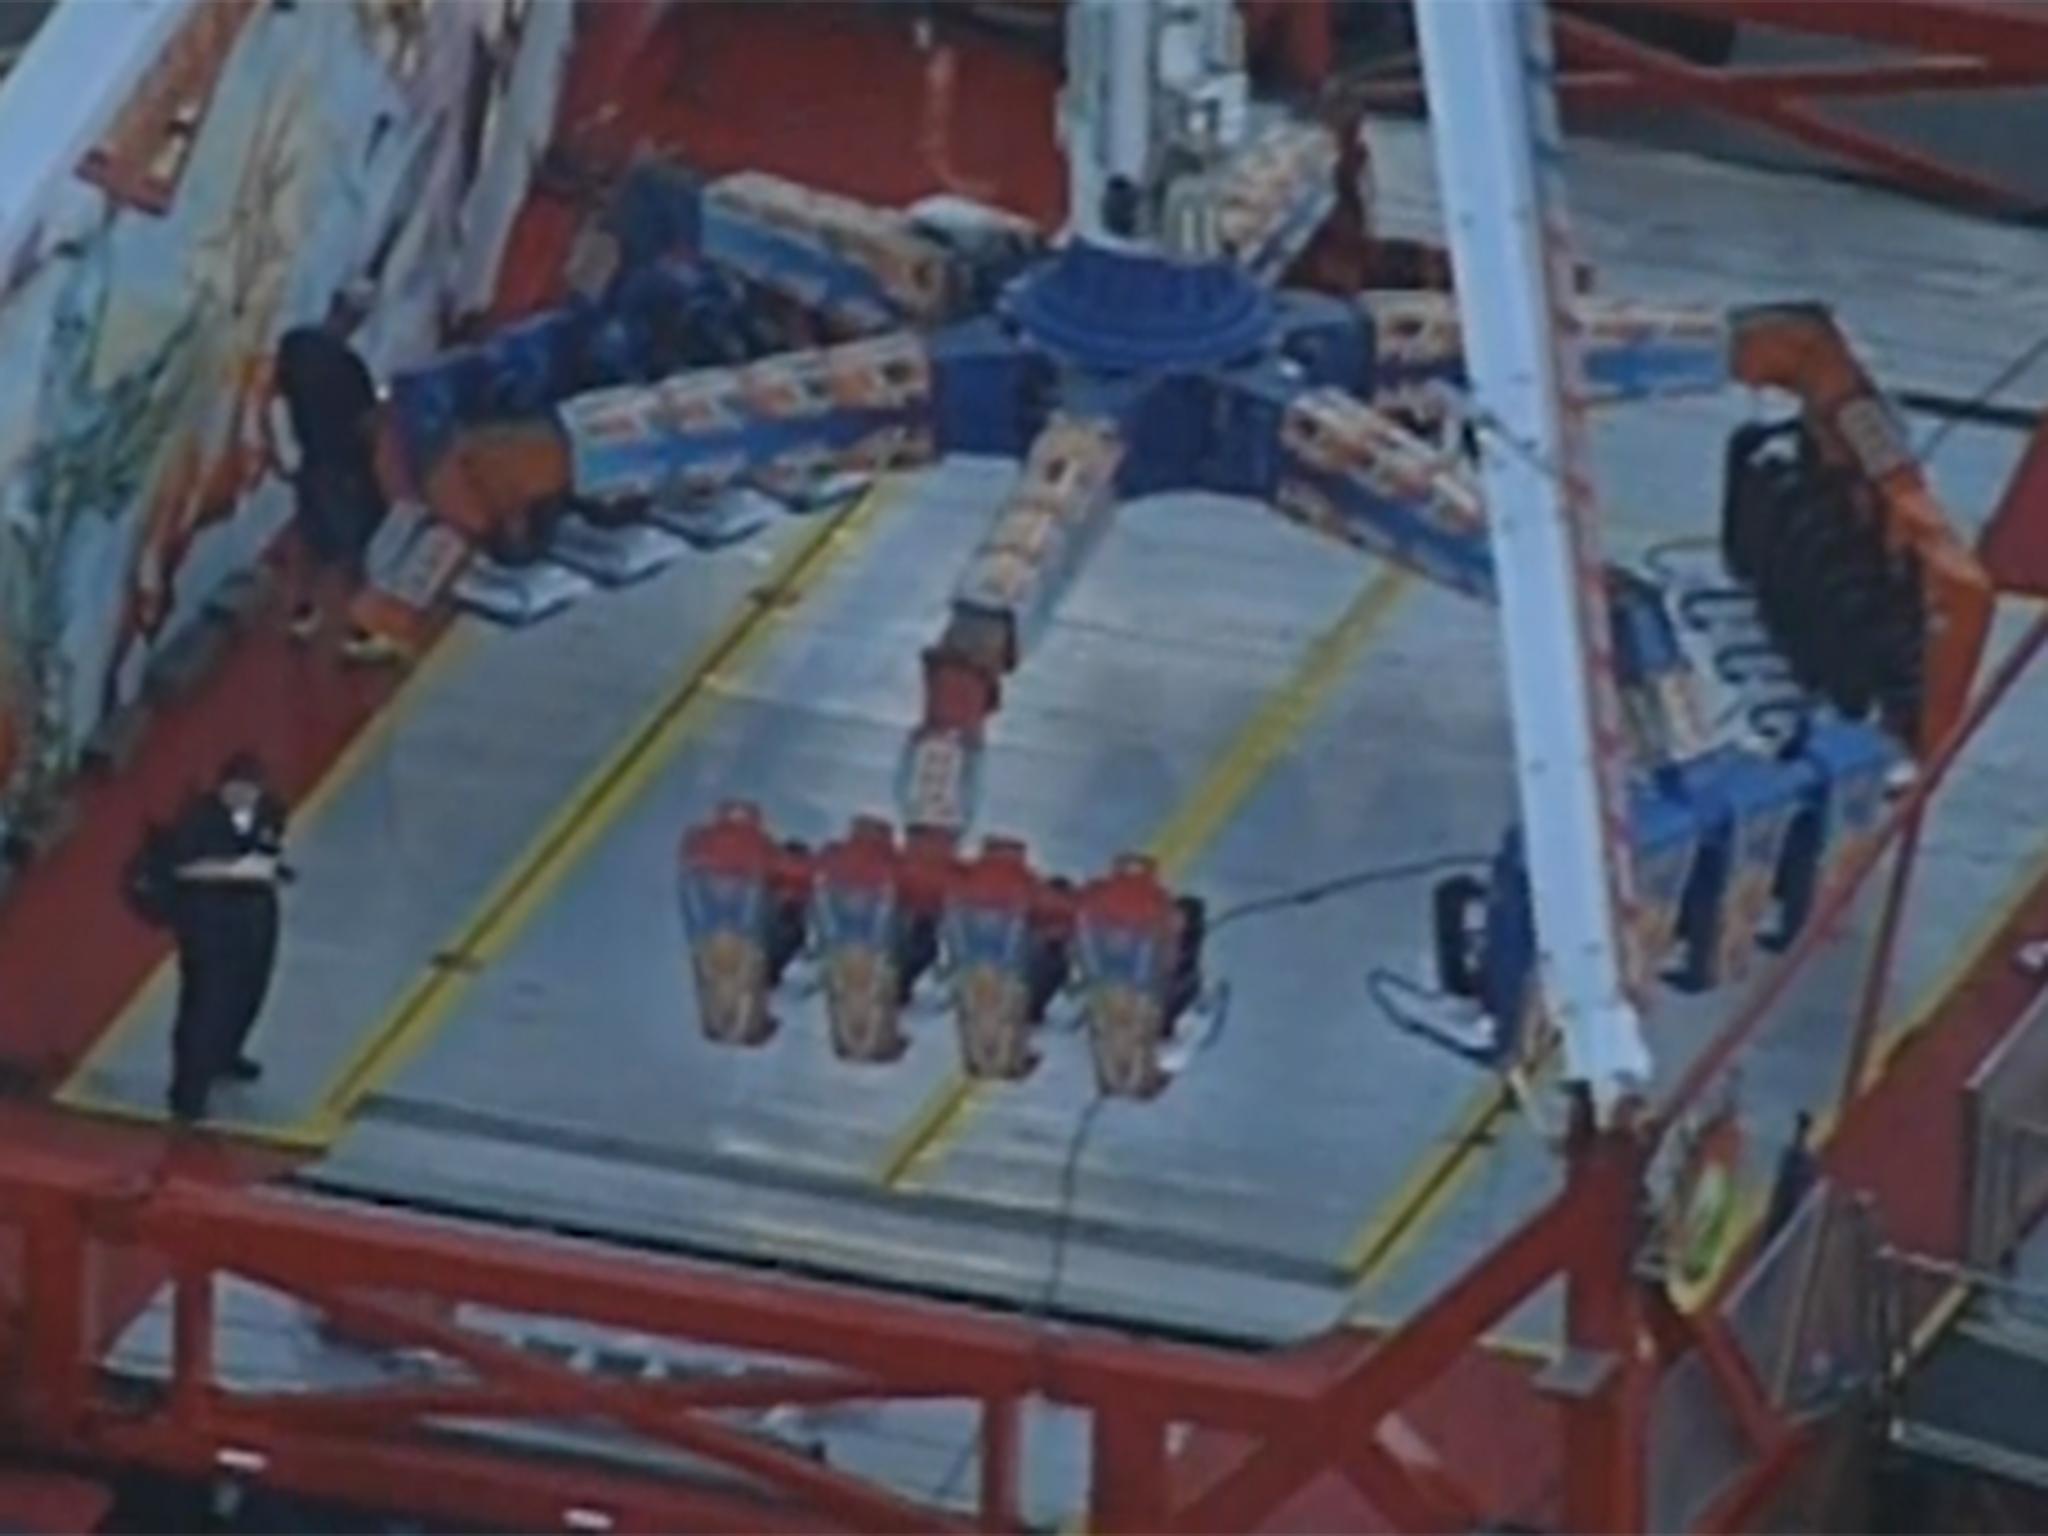 The rides in the UK are all KMG Afterburners – the same model as that involved in the incident at the Ohio State Fair